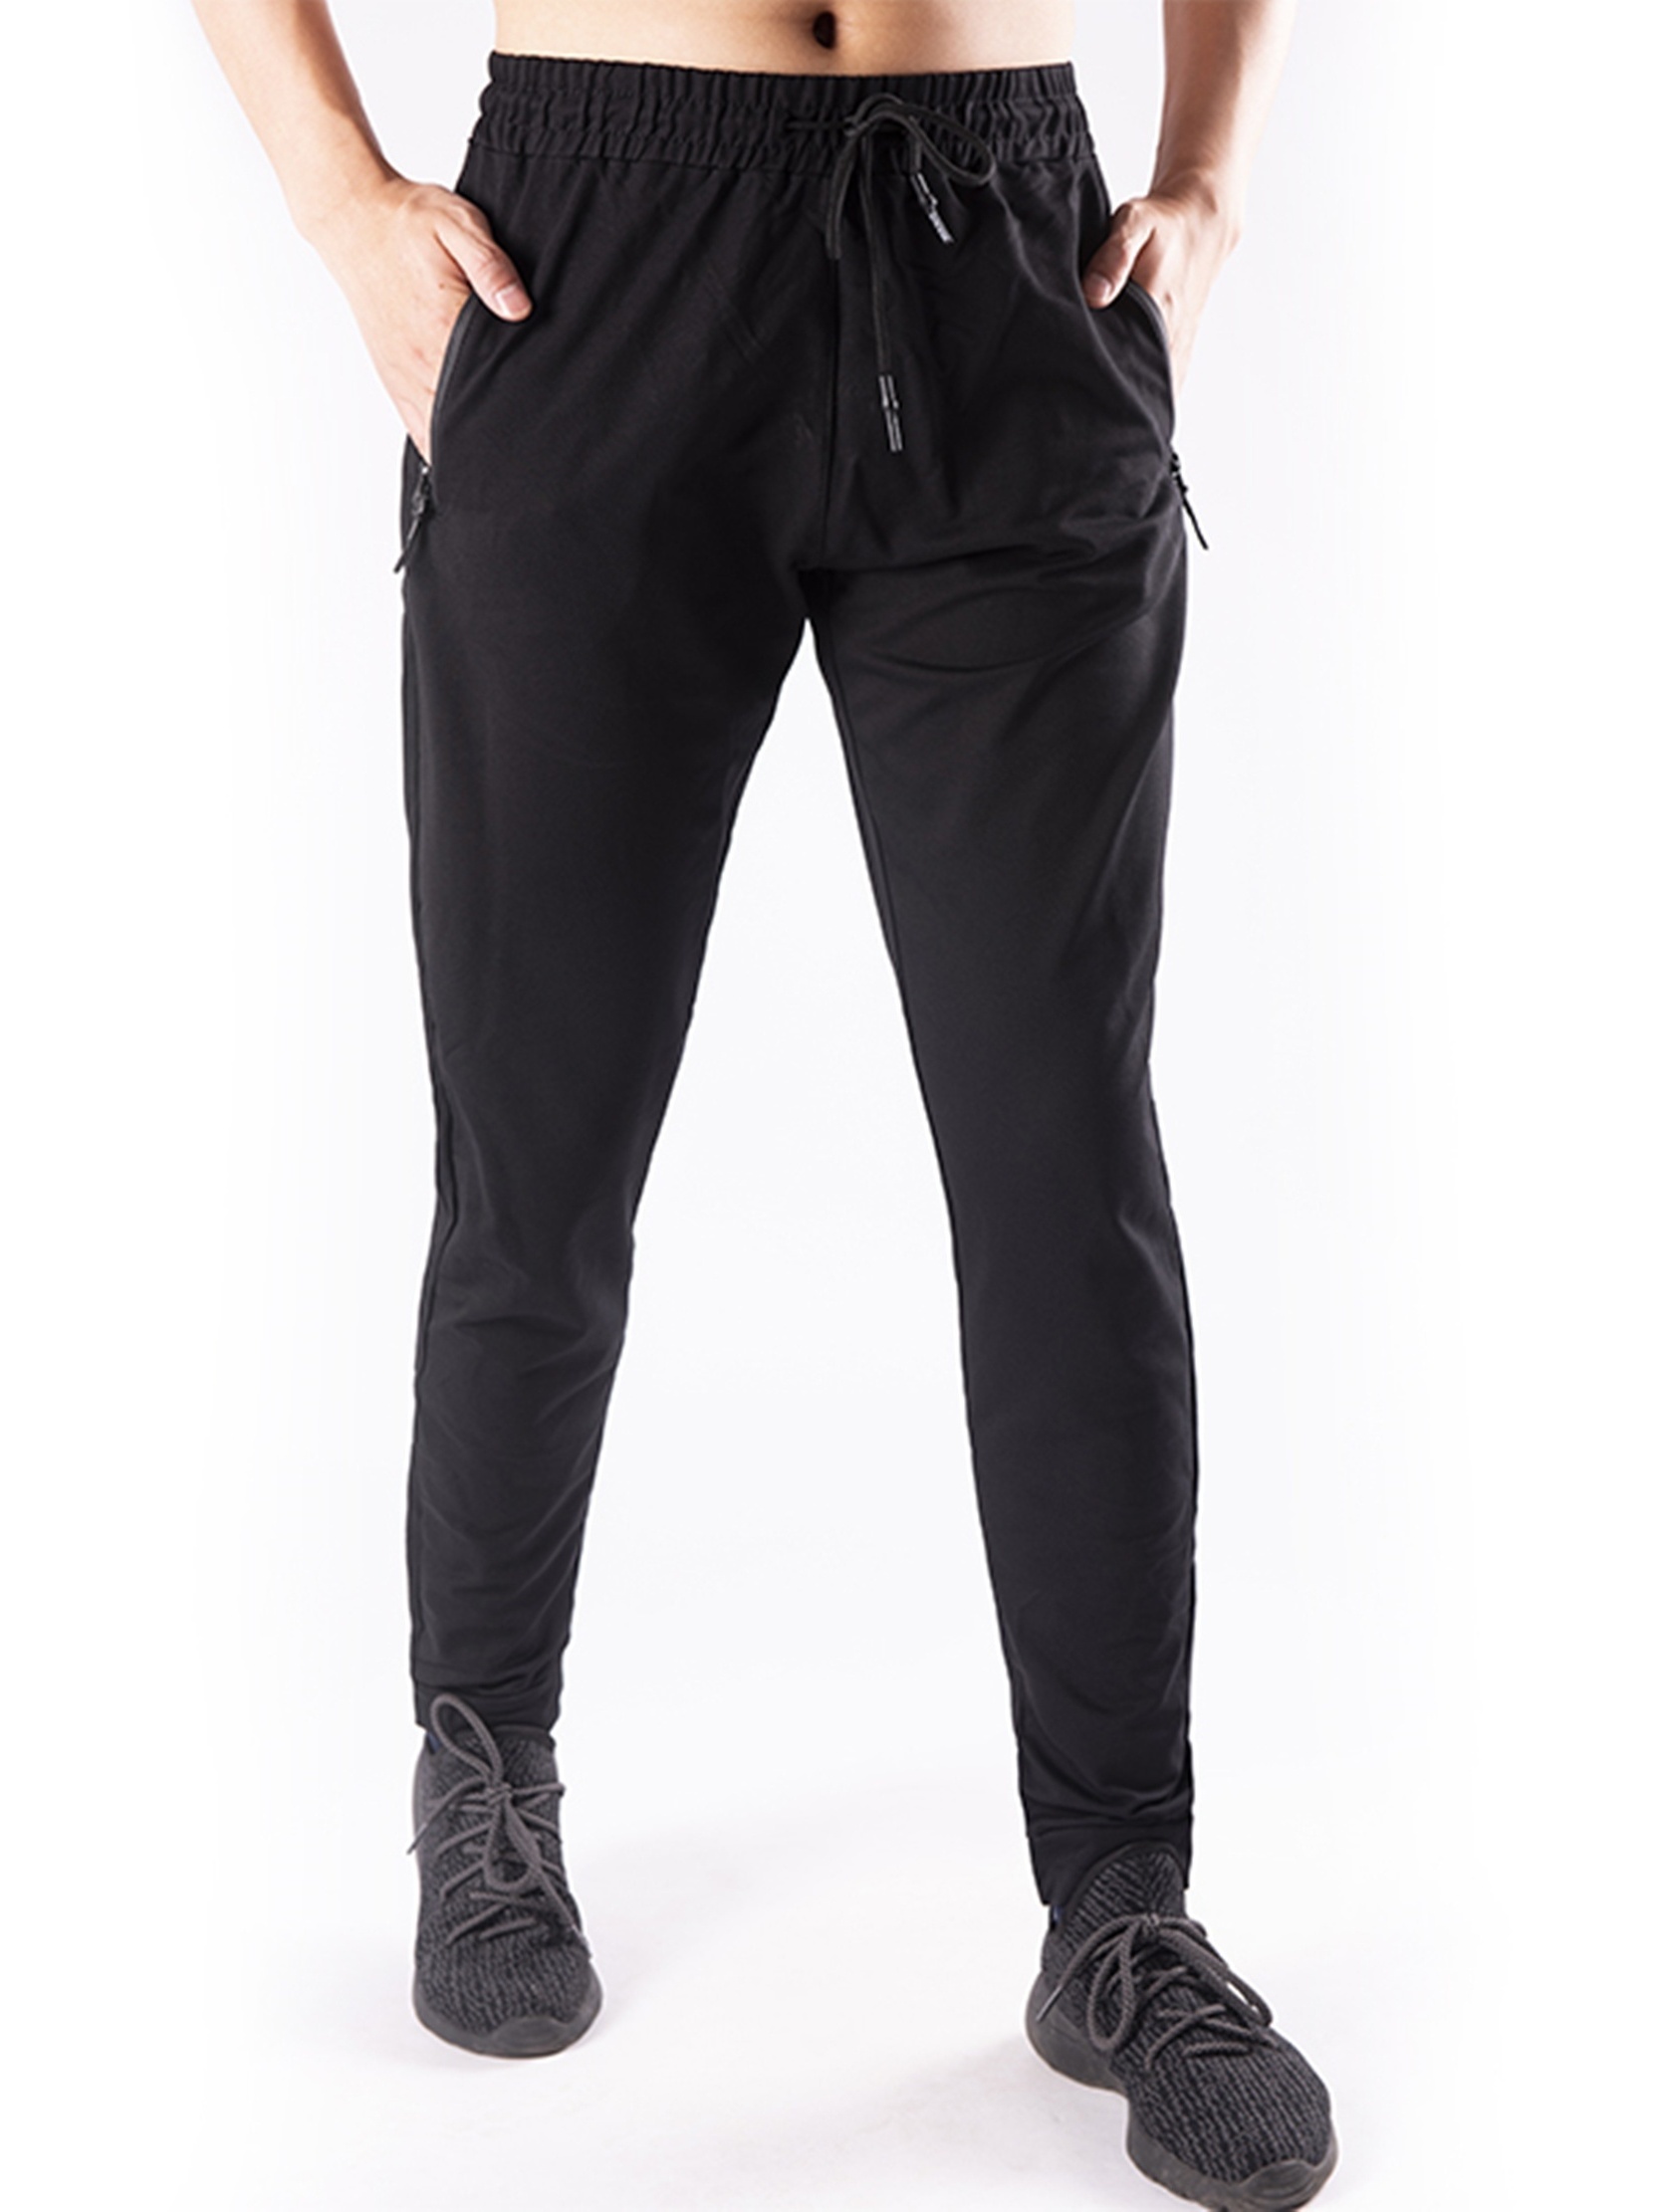 Black Cotton Modal Zipper Pocket Solid Joggers For Men at Rs 805/piece in  Surat